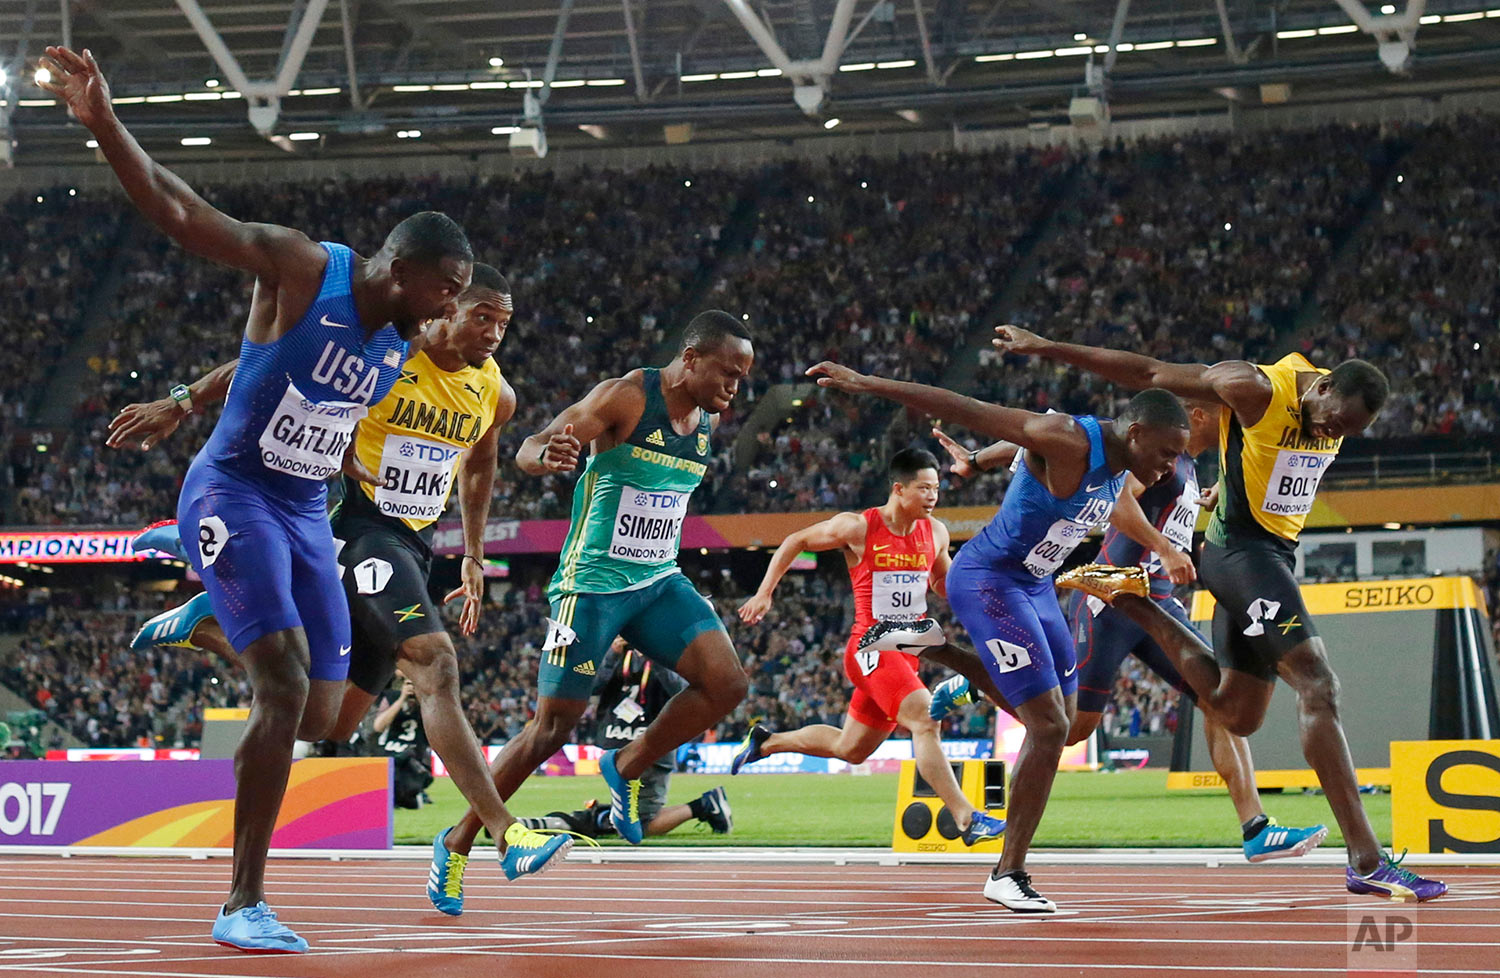  United States' Justin Gatlin, left, crosses the line to win gold ahead of silver medal winner United States' Christian Coleman, second right, and bronze medal winner Jamaica's Usain Bolt, right, in the men's 100m final during the World Athletics Cha